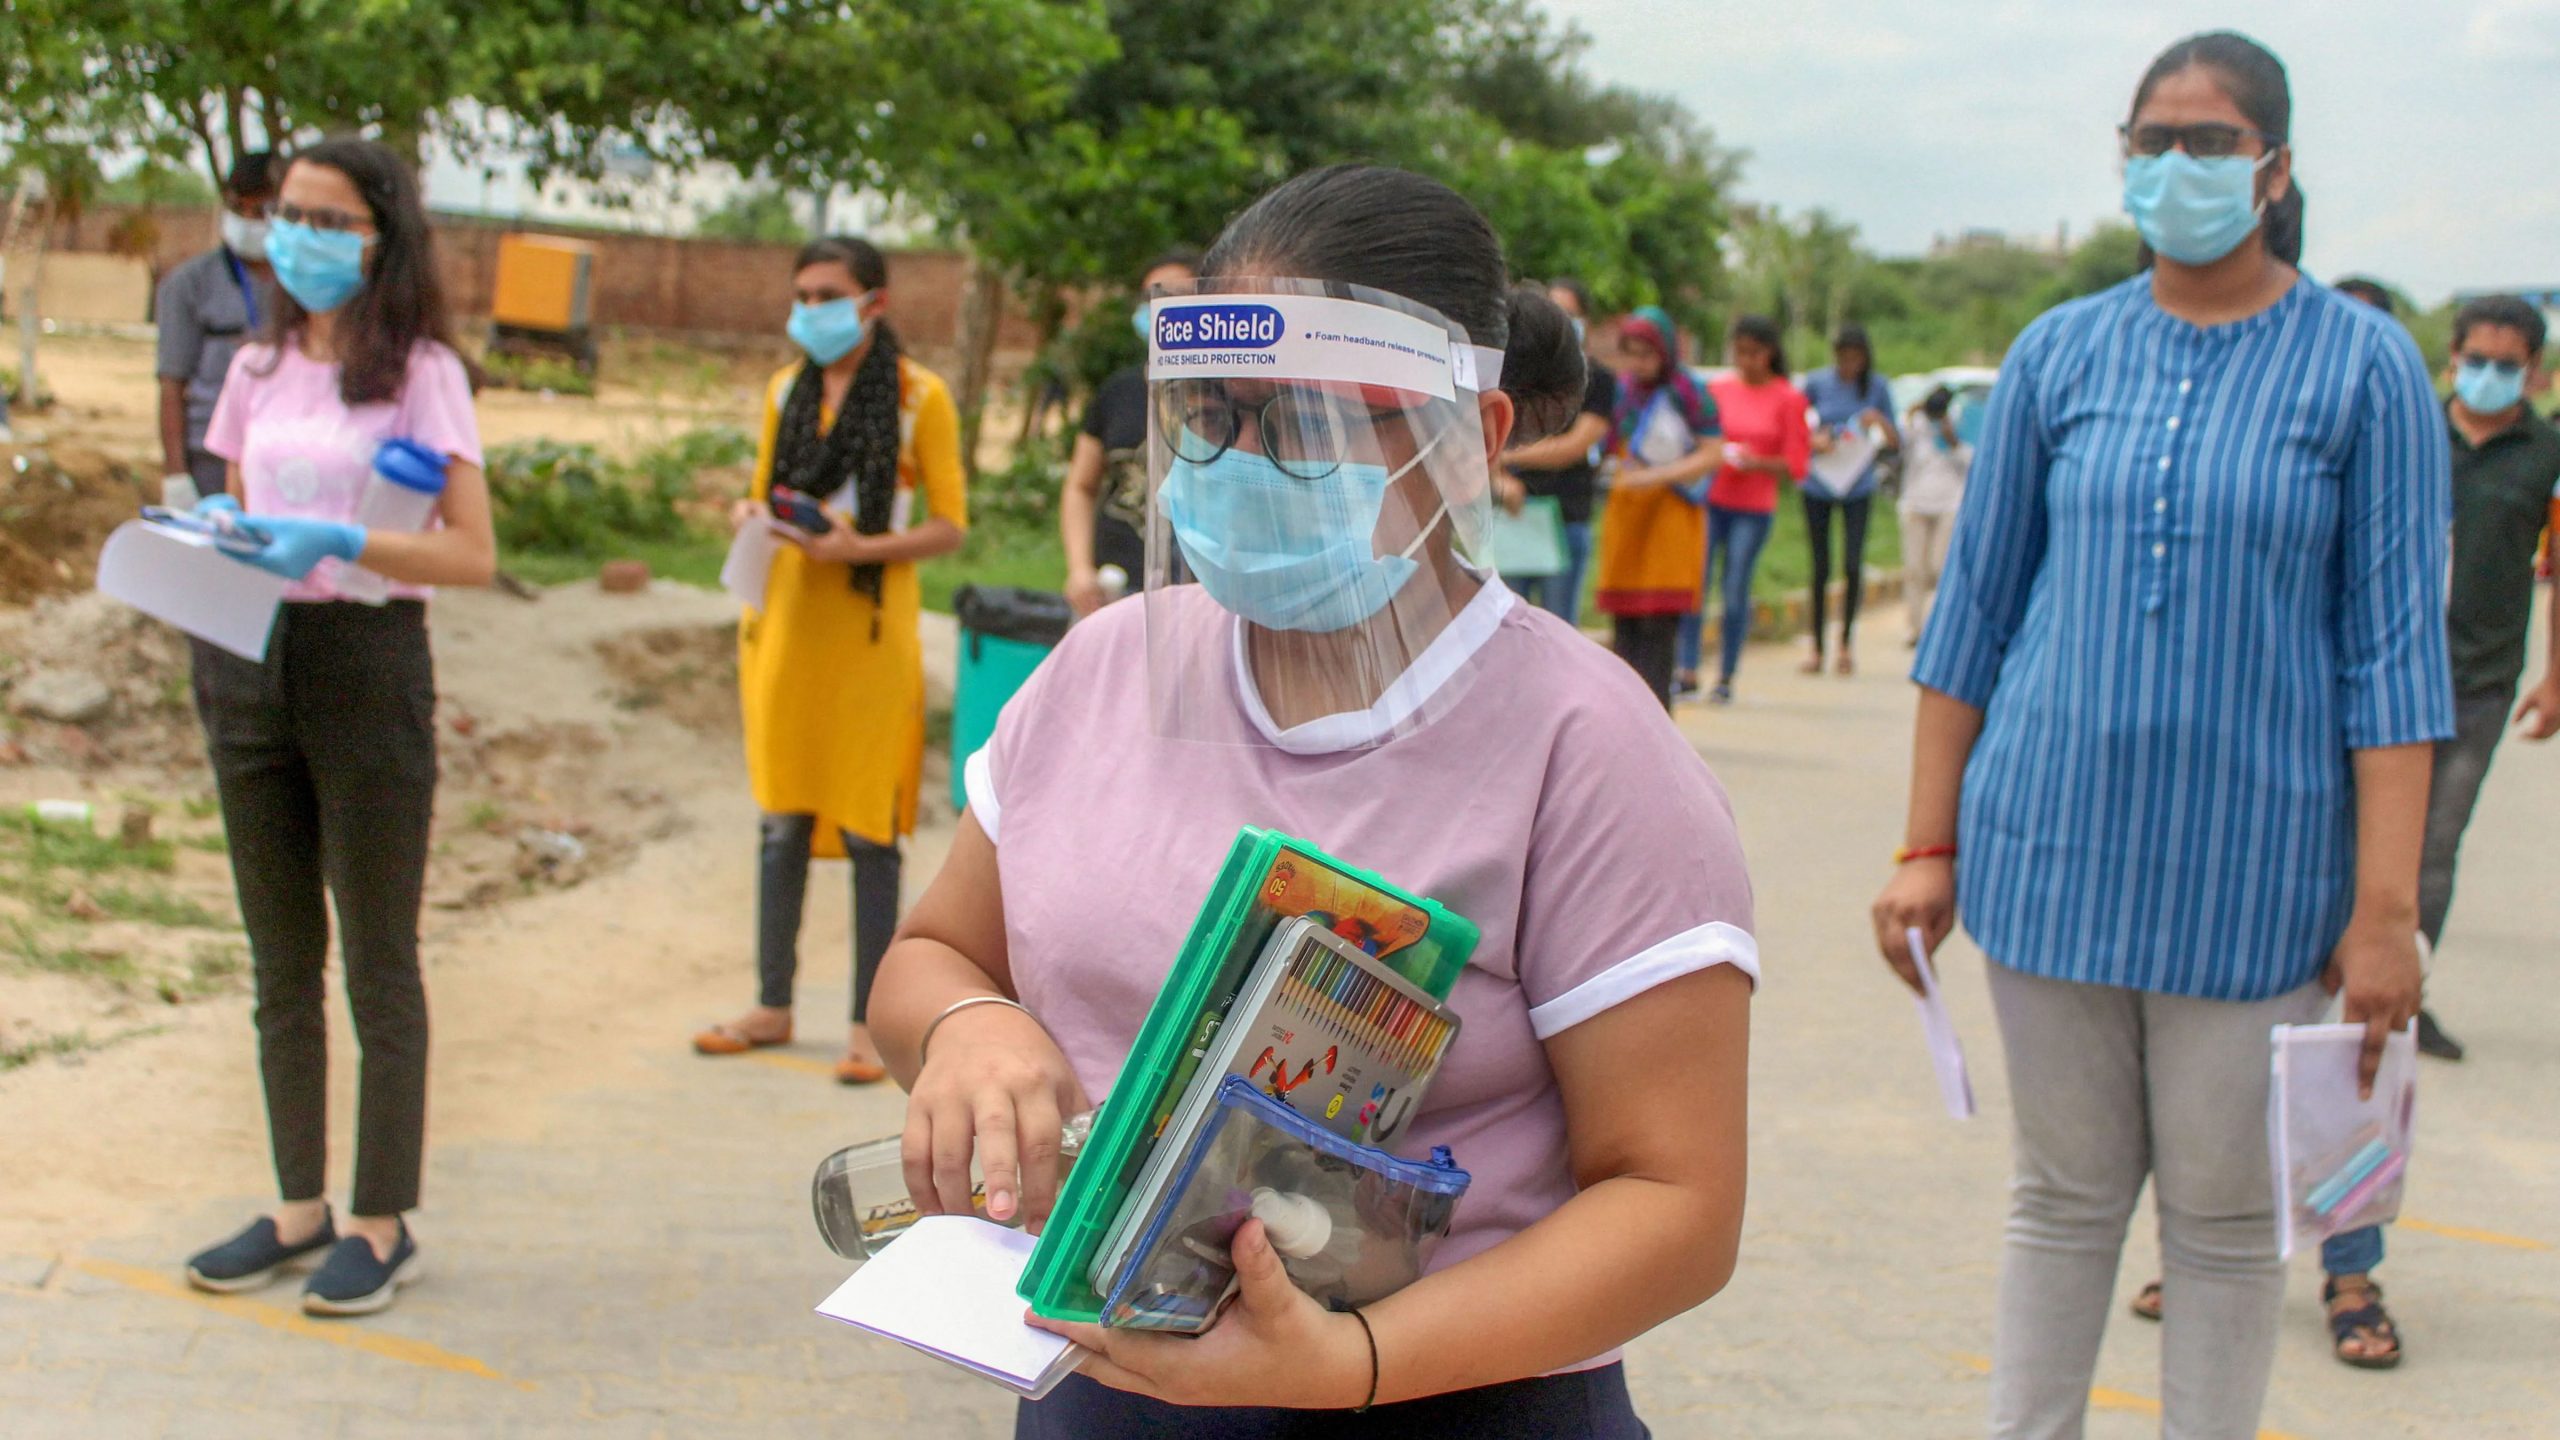 NEET 2020: Candidates reach exam centres wearing masks, maintaining COVID-19 protocols